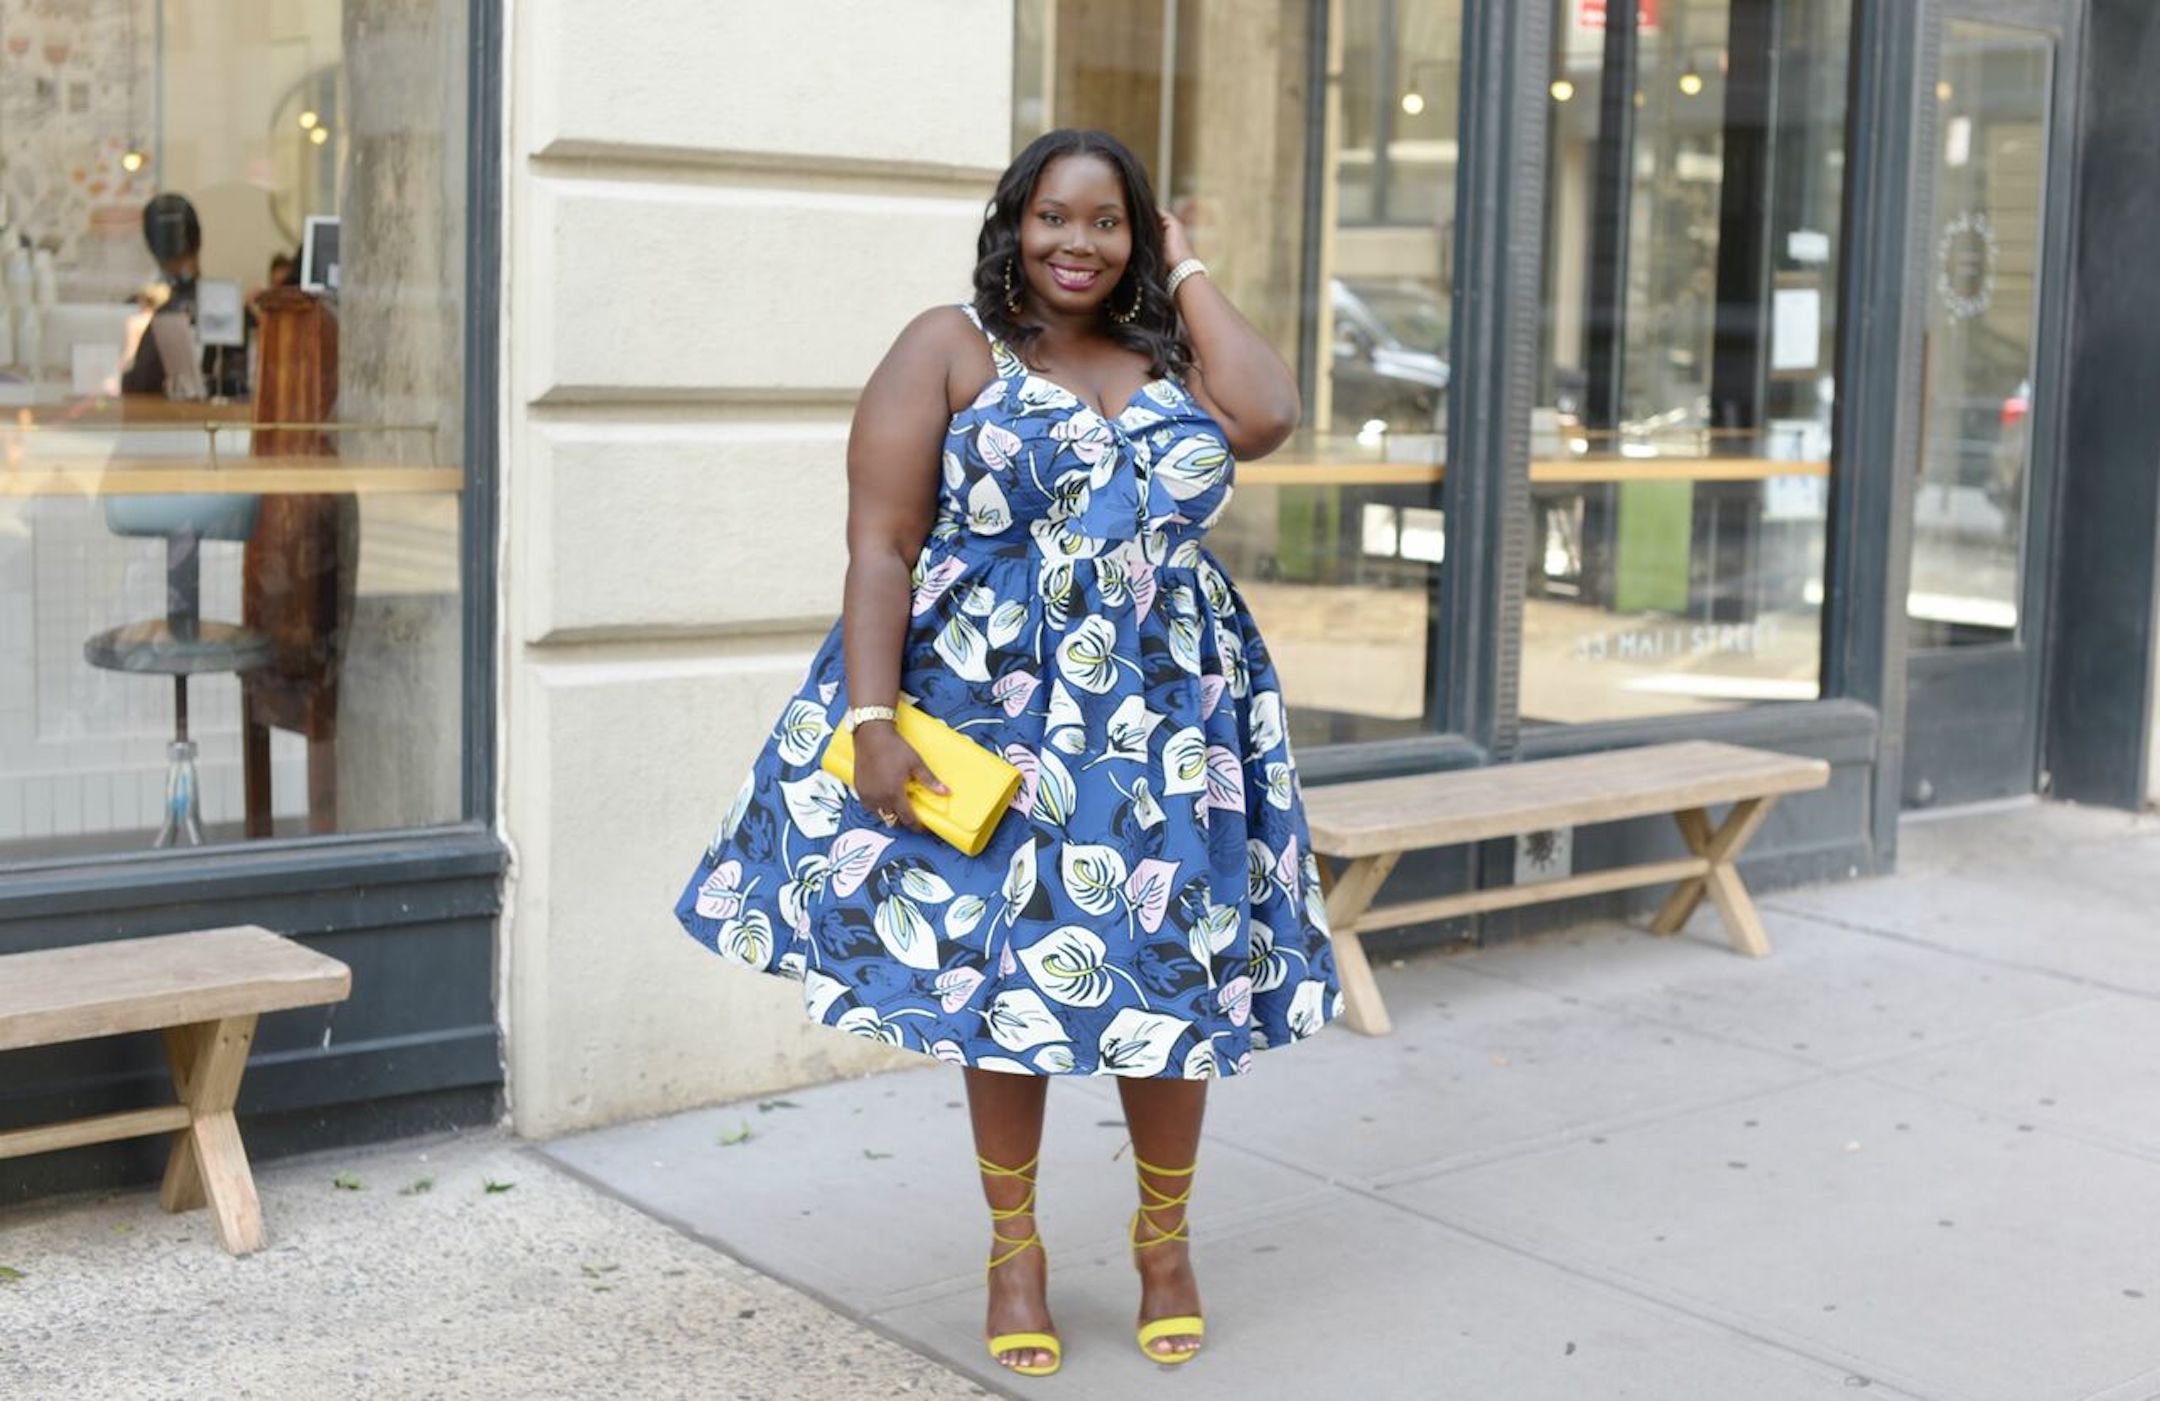 A Voice in the Plus Size Industry